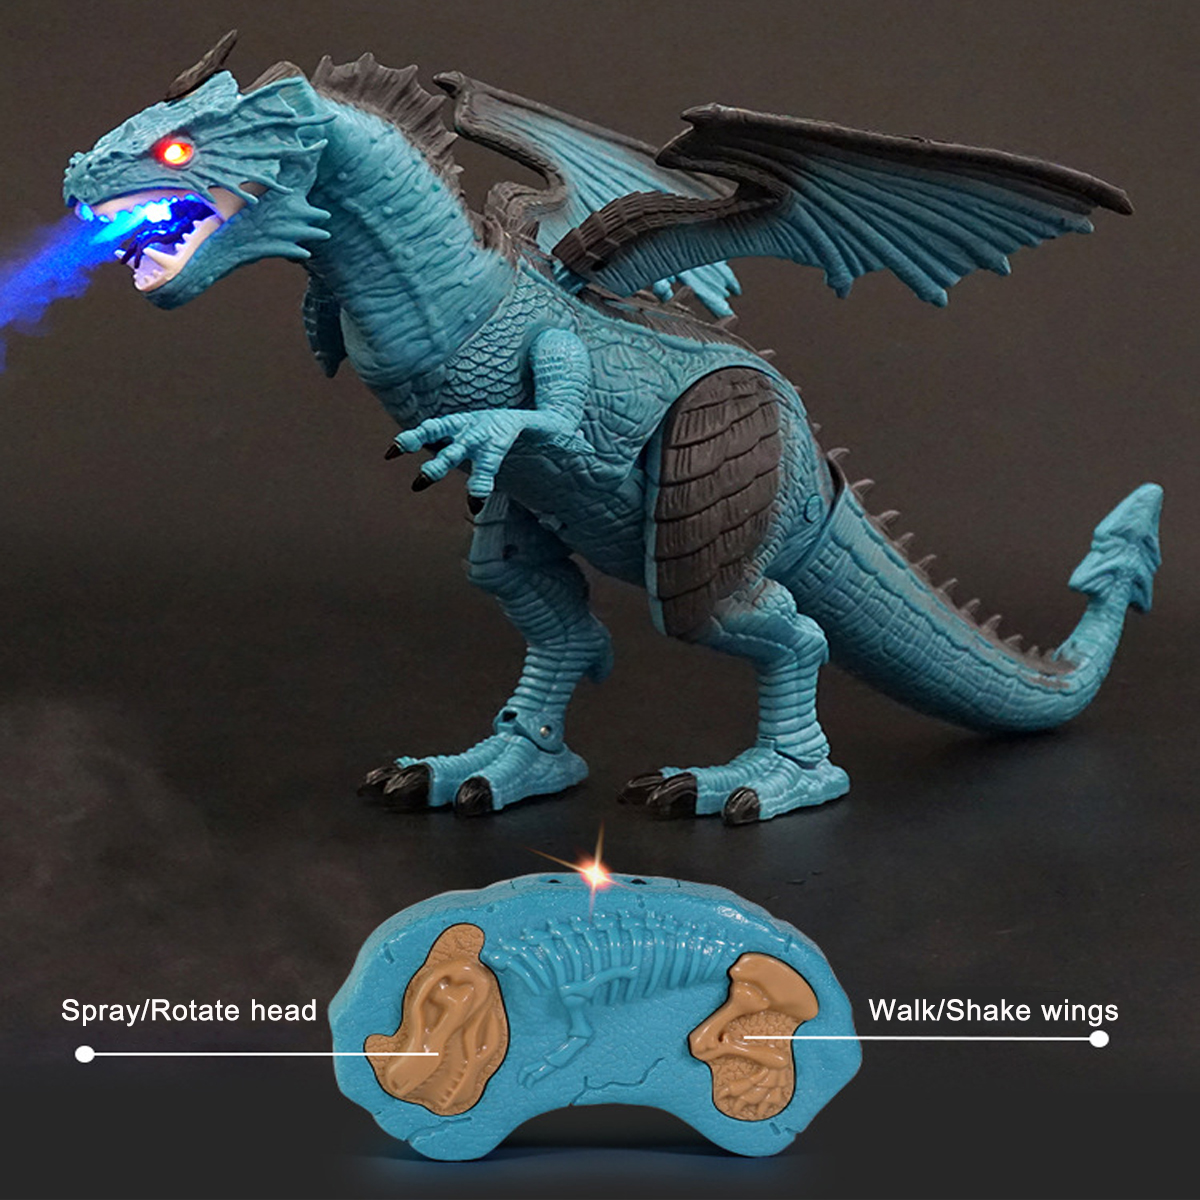 Remote-Control-360deg-Rotate-Spray-Dinosaur-with-Sound-LED-Light-and-Simulate-Flame-Diecast-Model-To-1773231-8